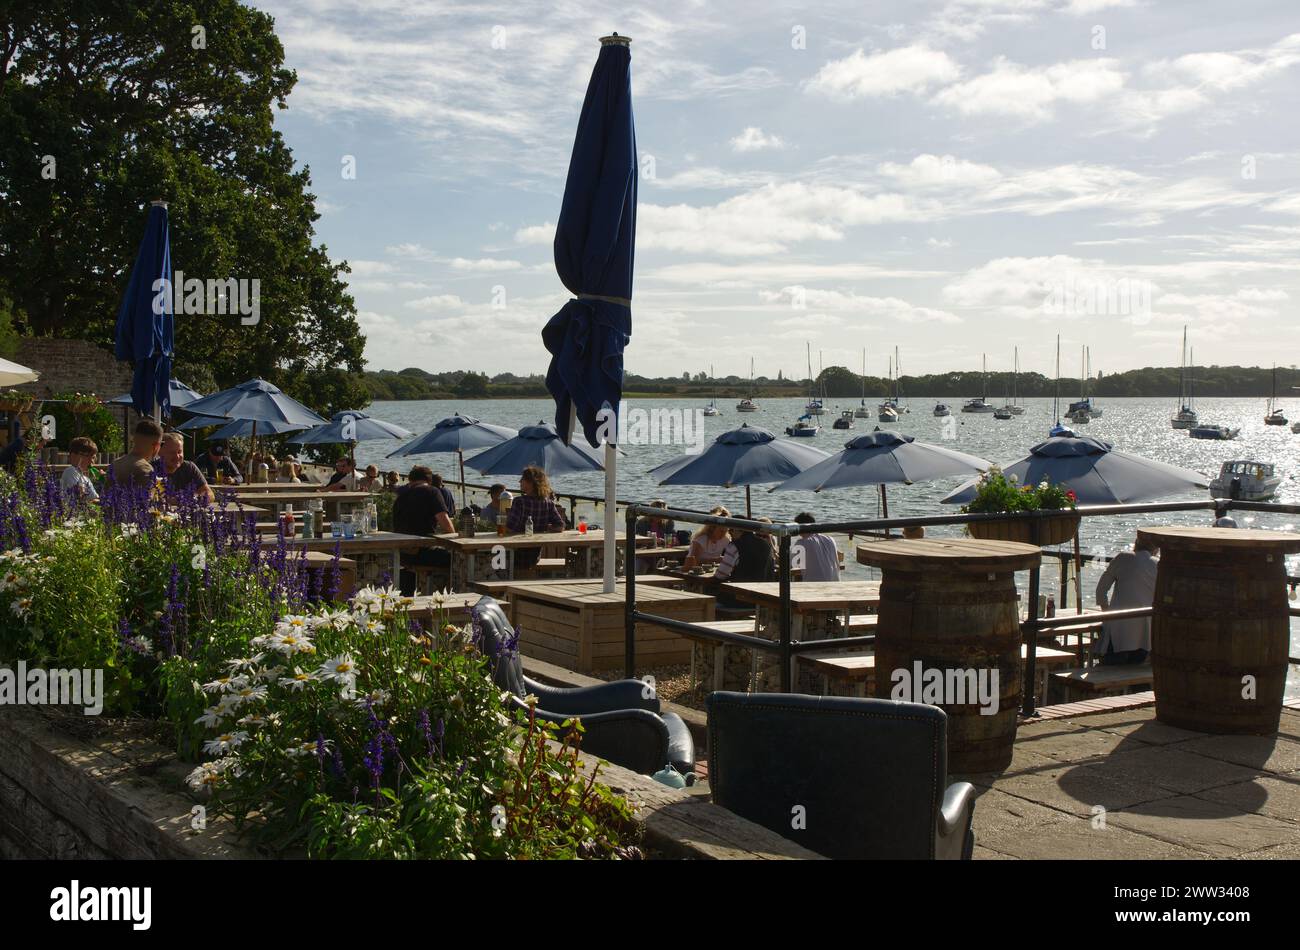 People enjoying food and drink on the waterfront terrace of the Crown and Anchor pub at Dell Quay in Chichester Harbour, West Sussex, England Stock Photo